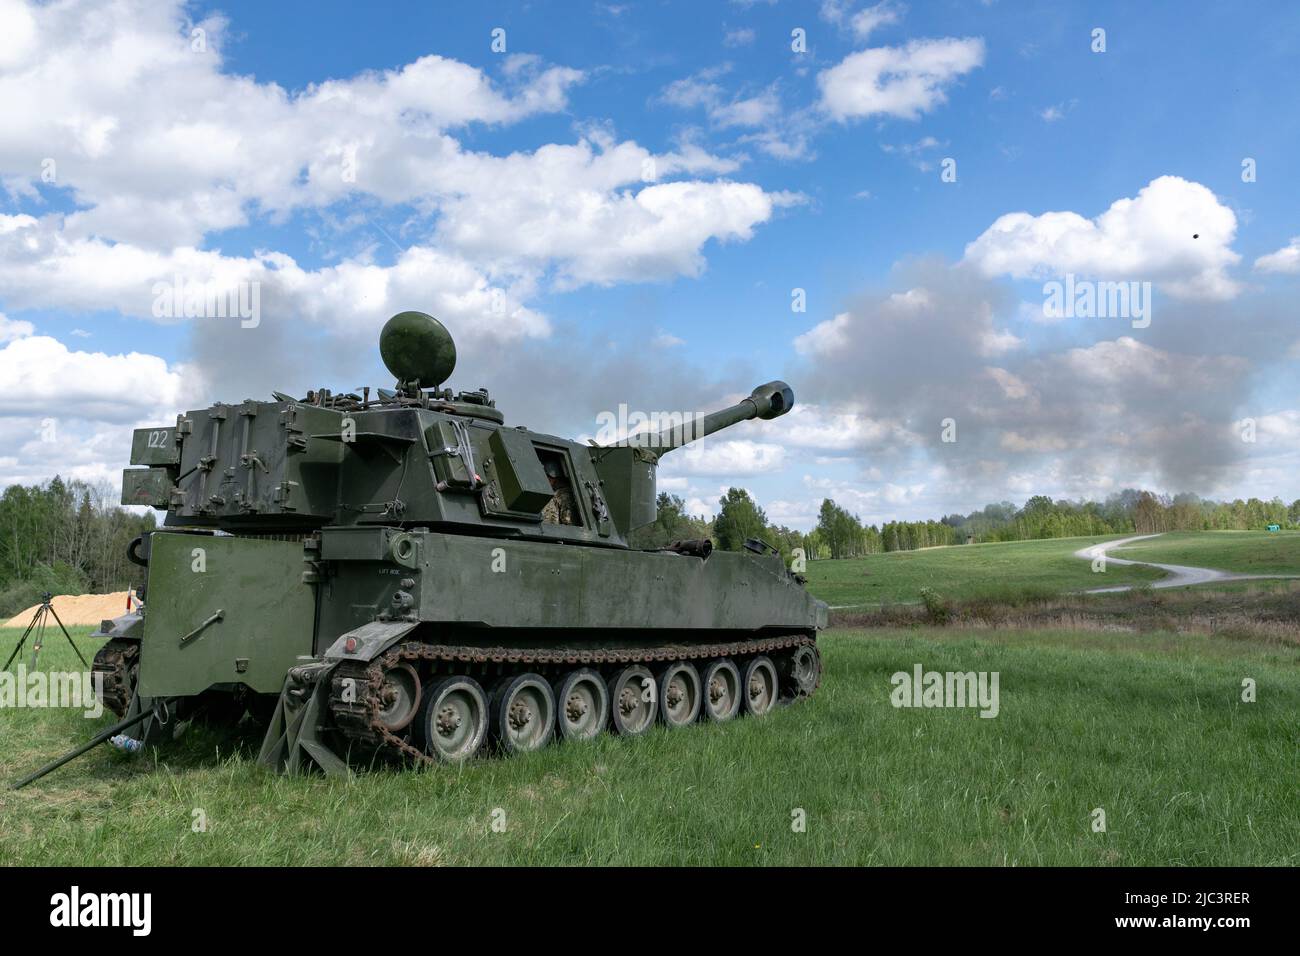 Ukrainian artillerymen fire the M109 self-propelled howitzer during training at Grafenwoehr Training Area, May 12, 2022. Soldiers from the U.S. and Norway trained Armed Forces of Ukraine artillerymen on the howitzers as part of security assistance packages from their respective countries. (U.S. Army  photo by Sgt. Spencer Rhodes, 53rd Infantry Brigade Combat Team) Stock Photo